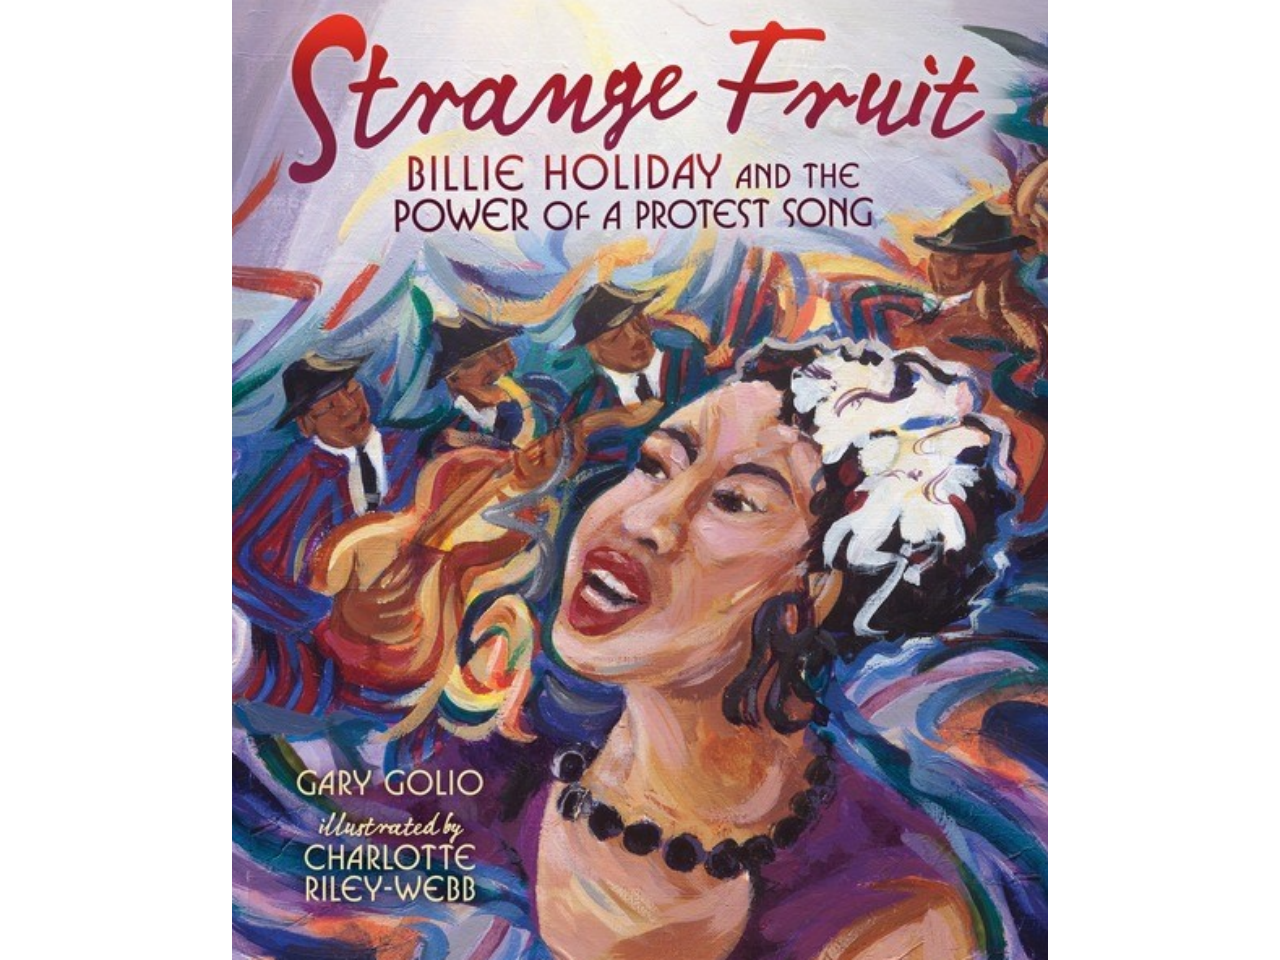 Strange Fruit: Billie Holiday and the Power of a Protest Song